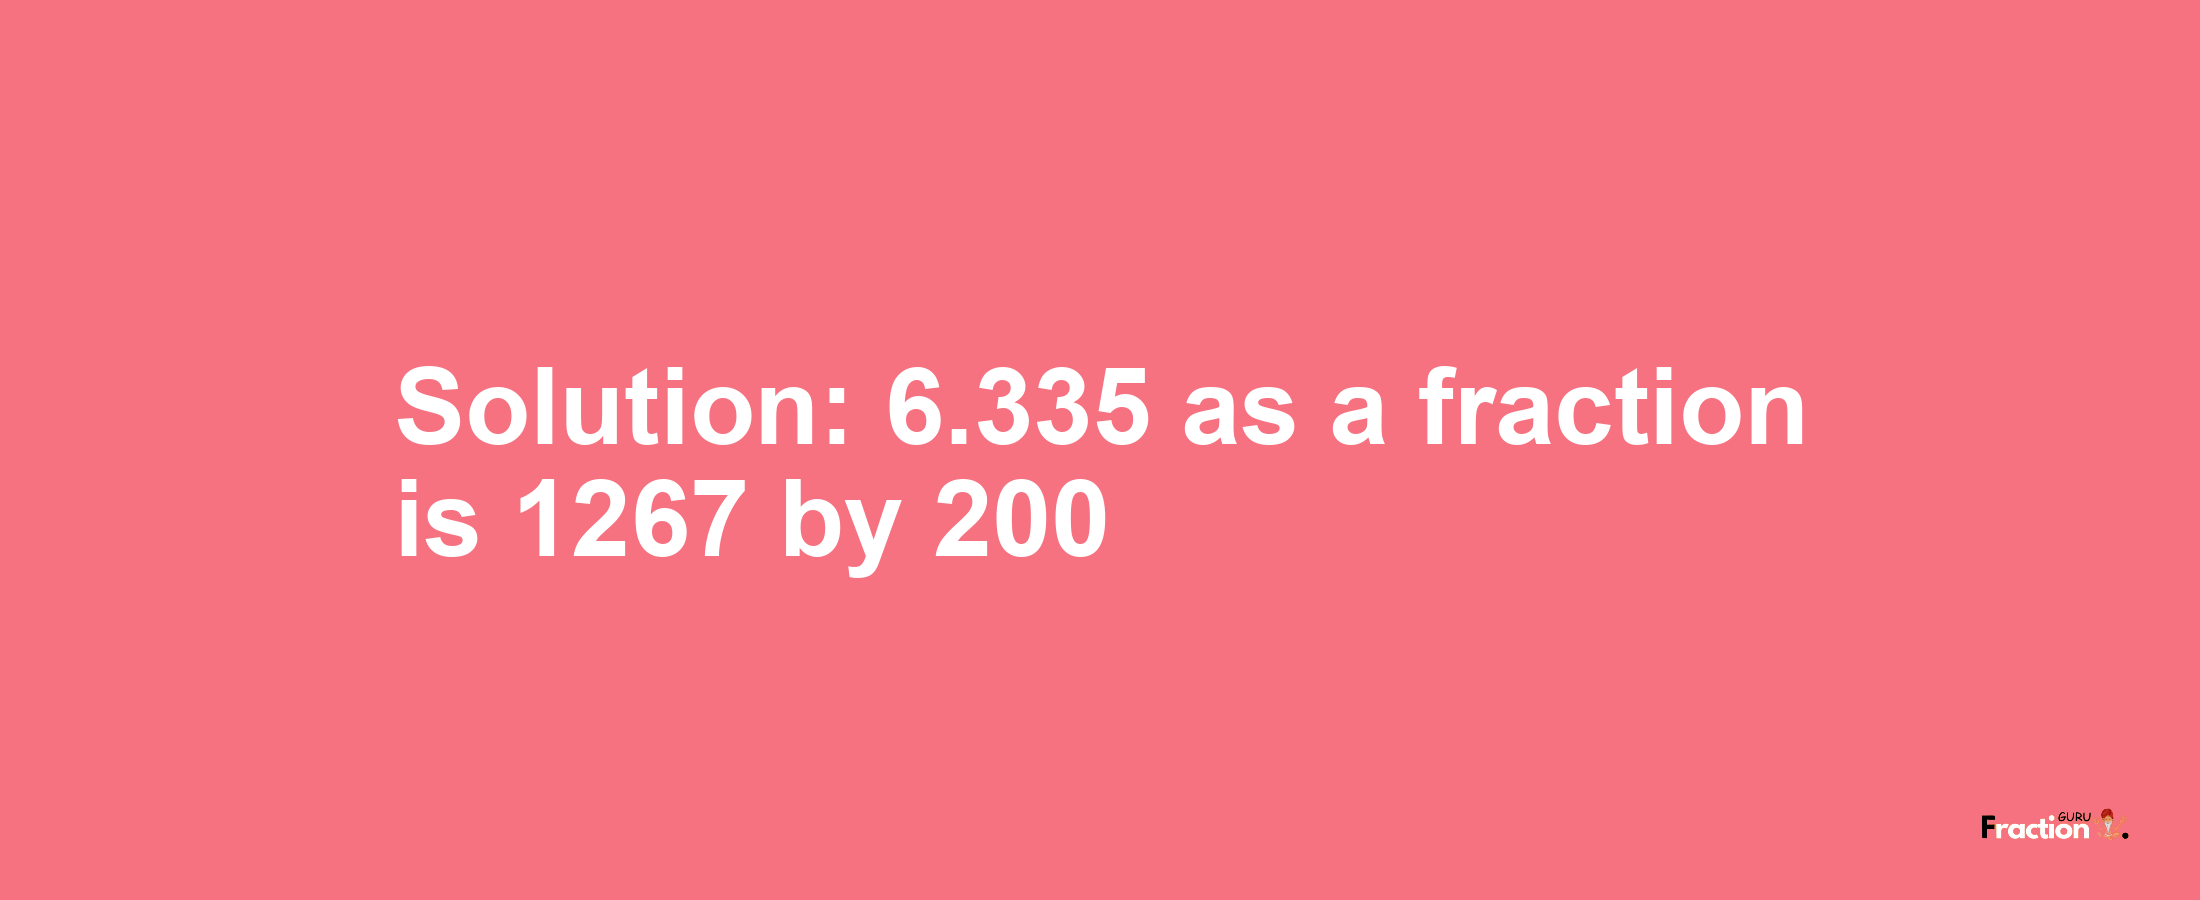 Solution:6.335 as a fraction is 1267/200